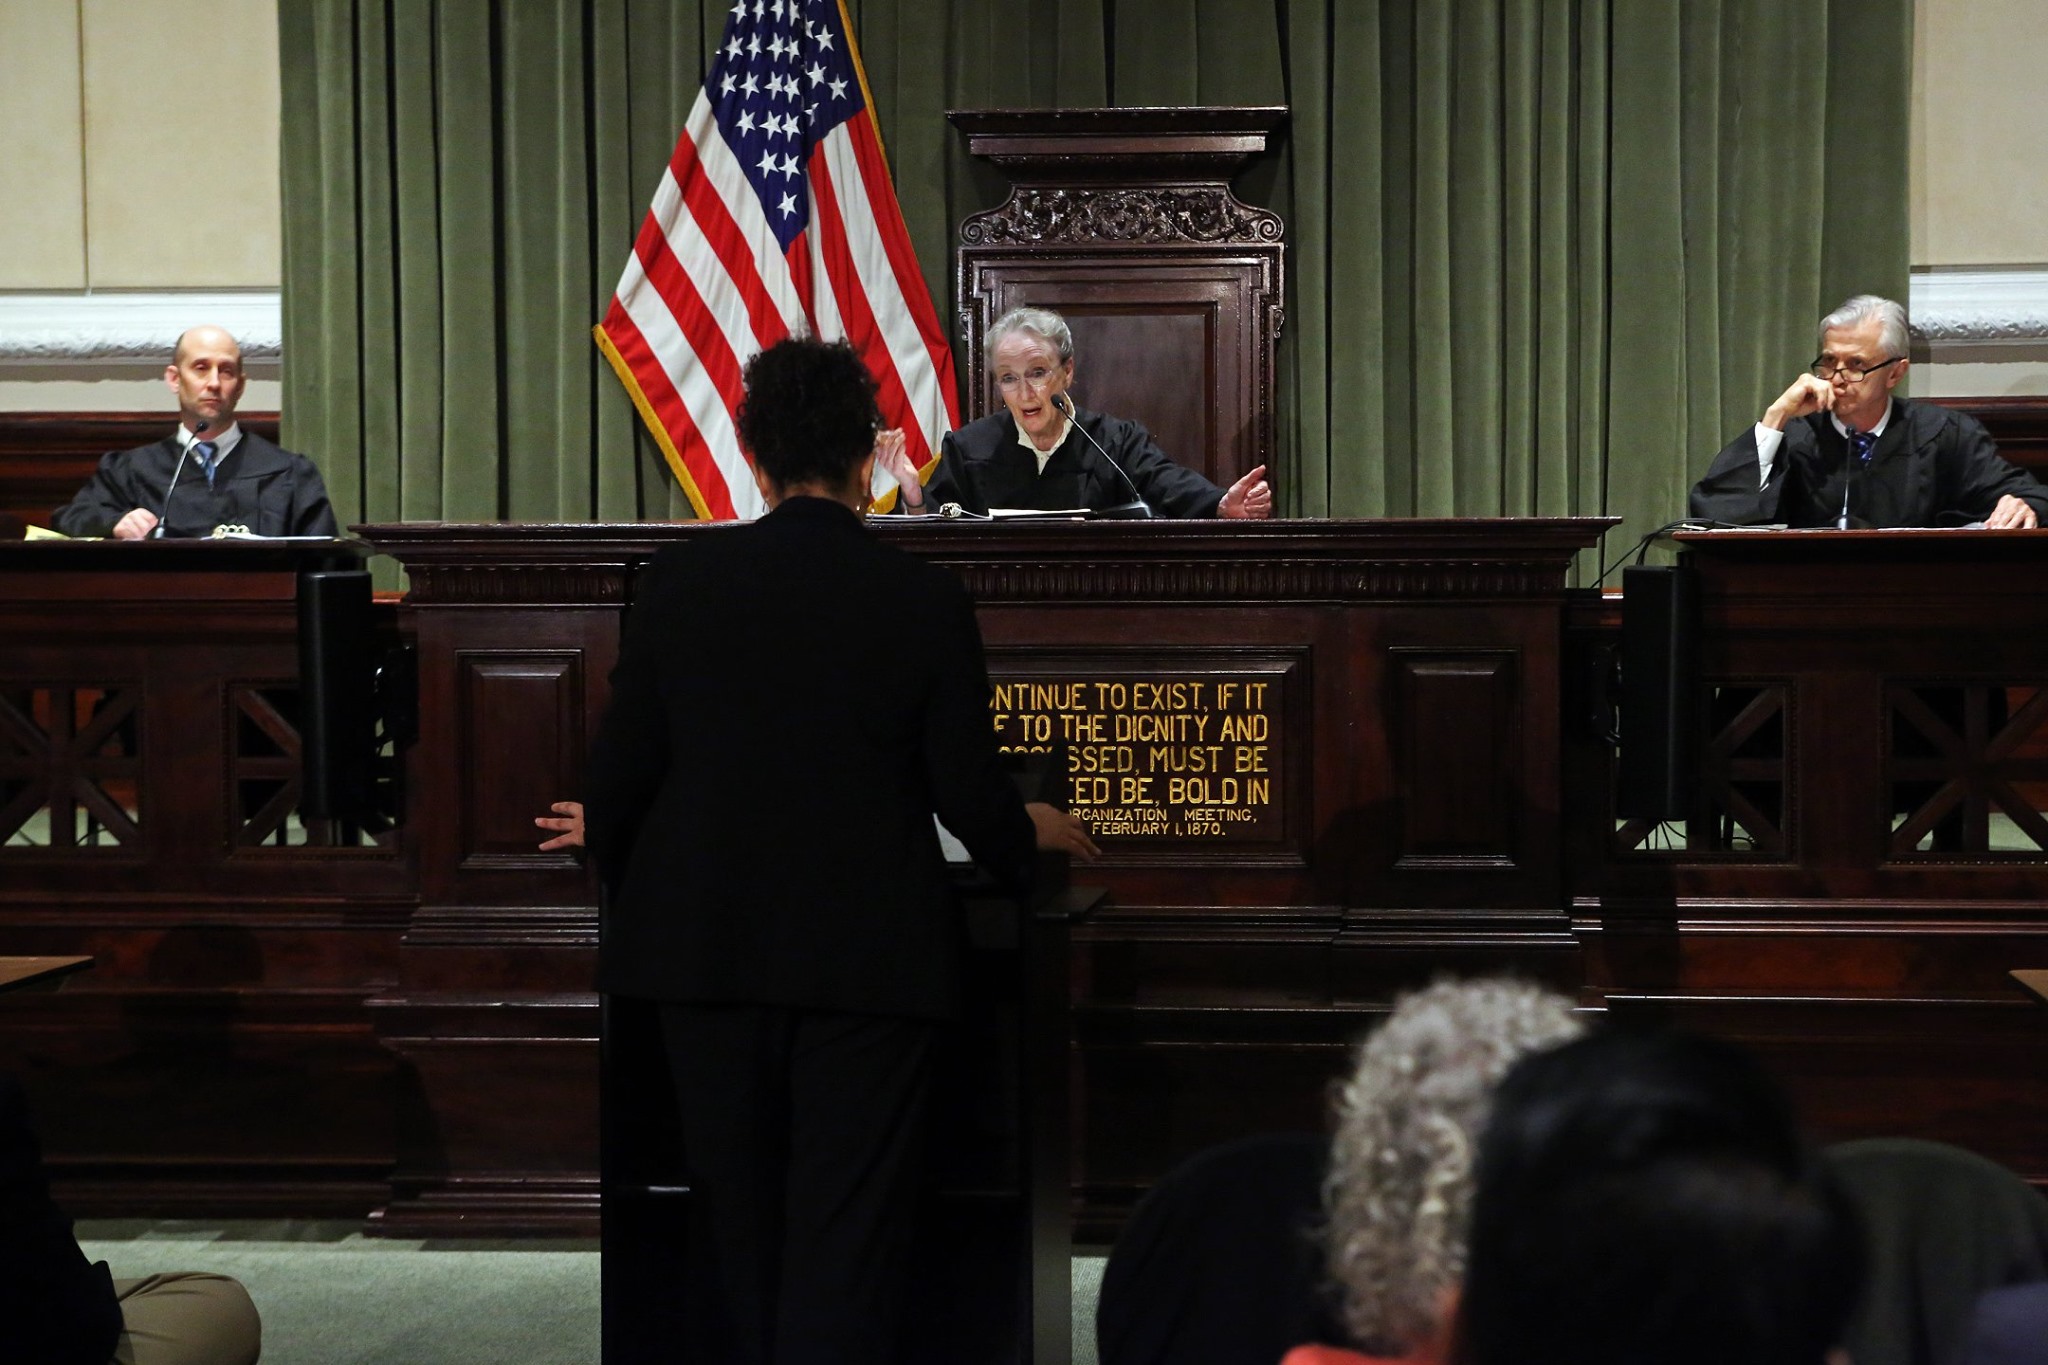 The Courtroom: Performance and Conversation - Forum on Life, Culture & Society2048 x 1365